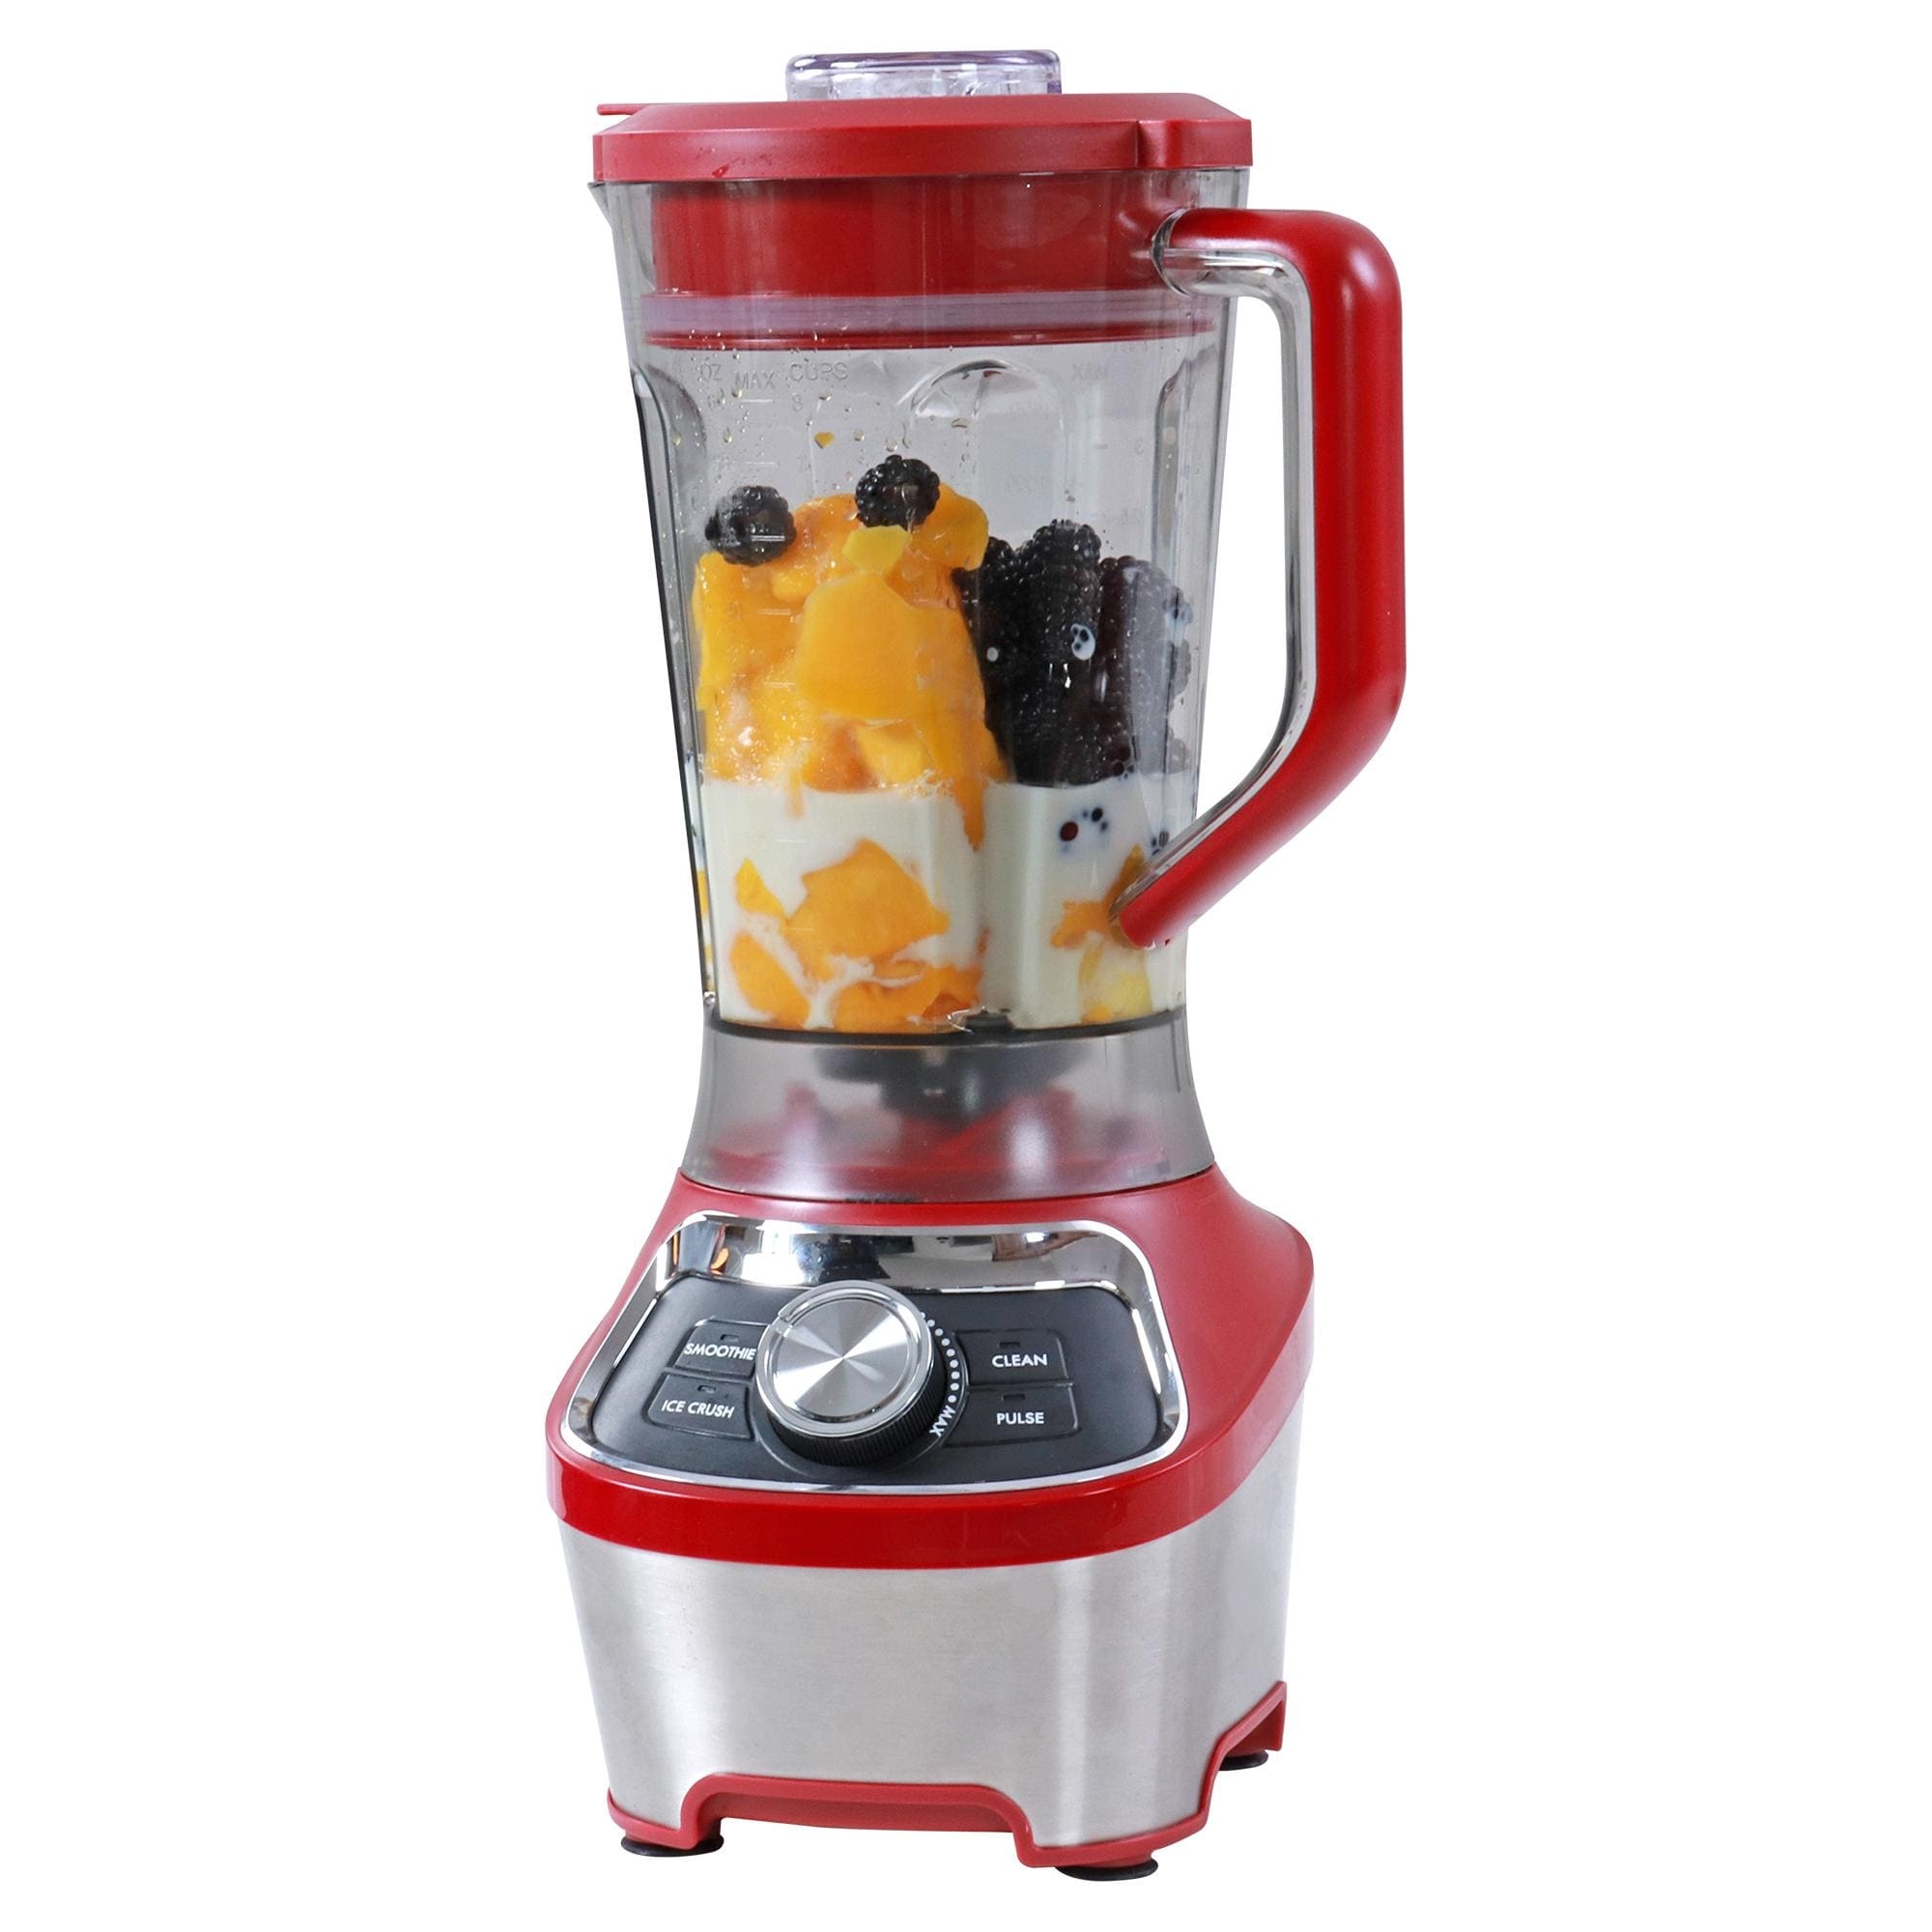 https://ak1.ostkcdn.com/images/products/is/images/direct/6bcecb96c5f613b0b11e53ea3d417140faac7c69/Kenmore-64-oz-Stand-Blender%2C-1200W%2C-Smoothie%2C-Ice-Crush%2C-Self-Clean-Modes%2C-Variable-Speed%2C-Red.jpg